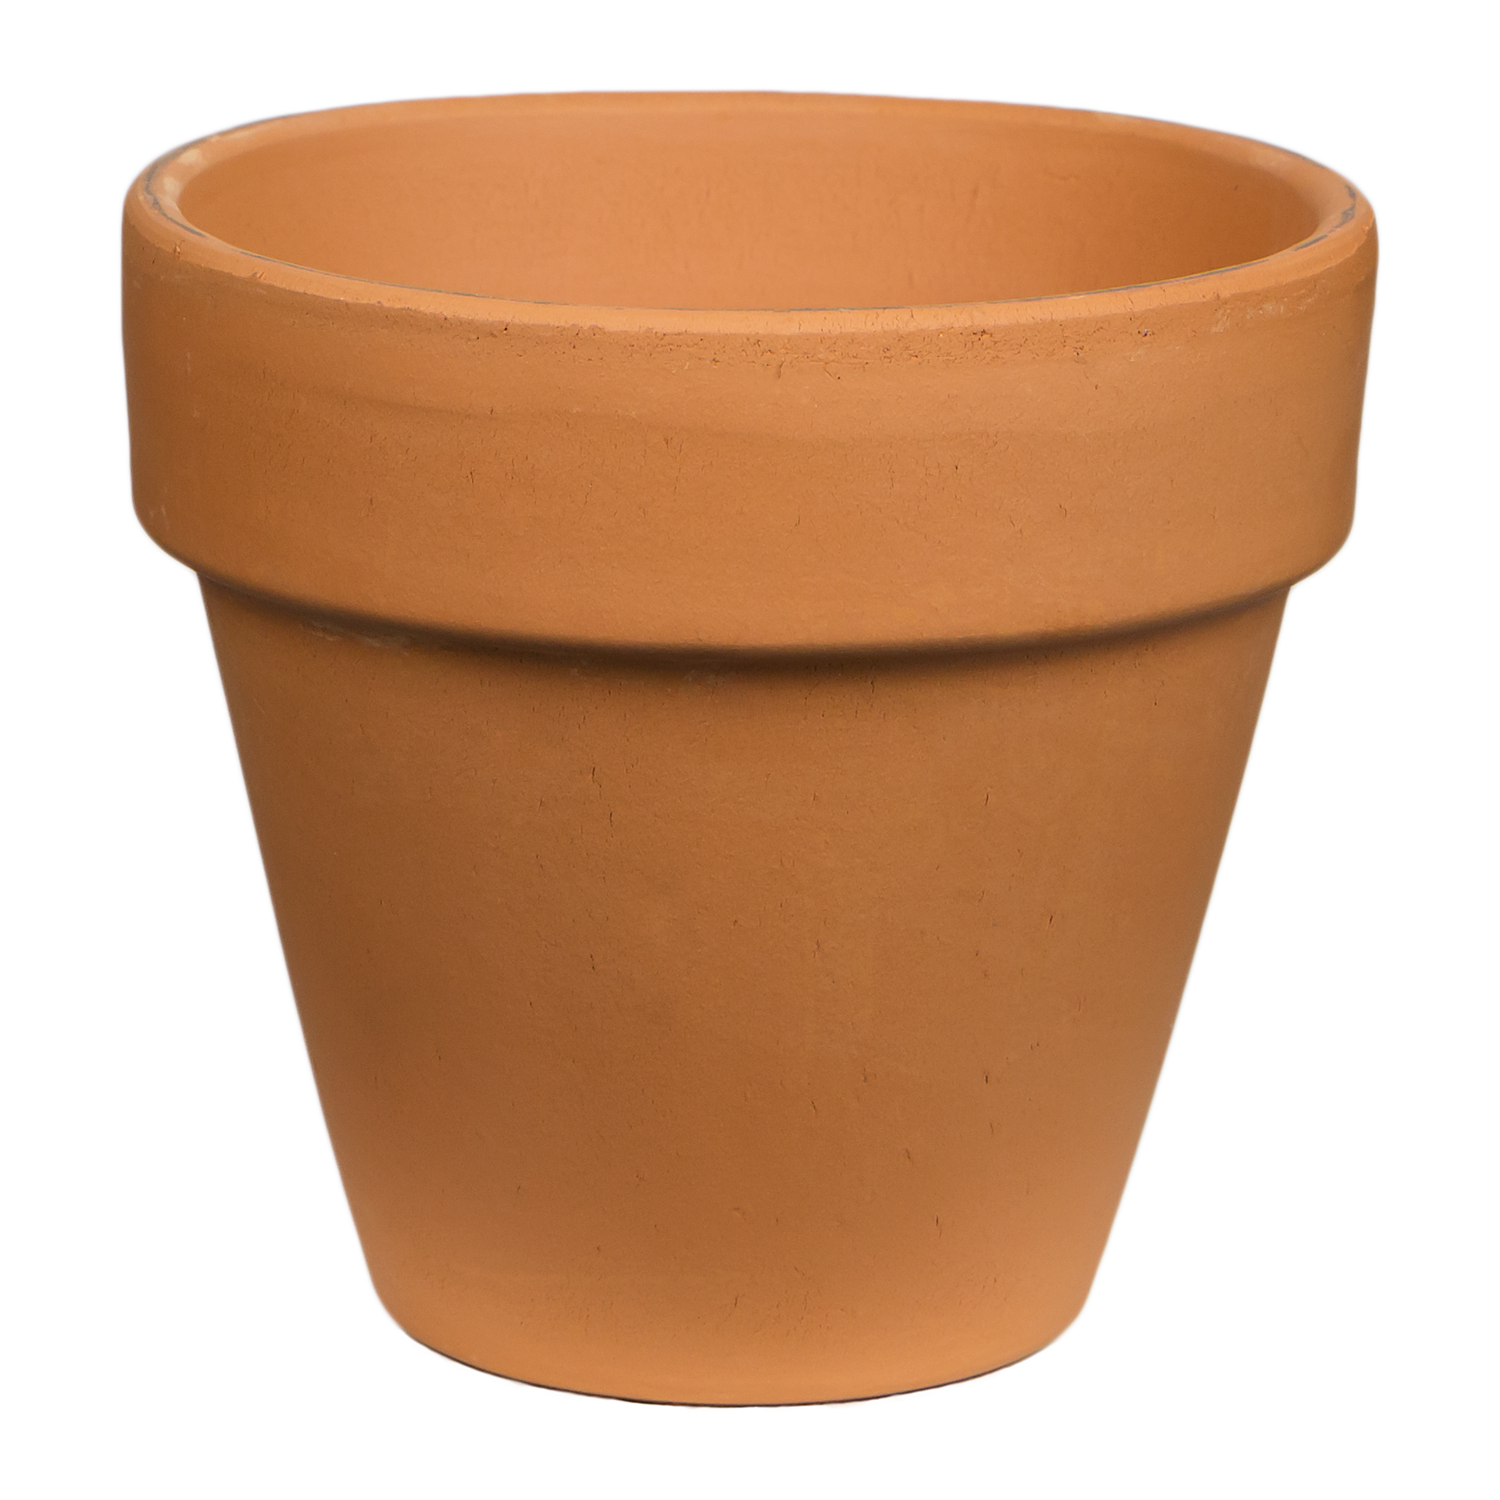 Pennington Red Terra Cotta Clay Planter, 2 inch Pot - image 1 of 10